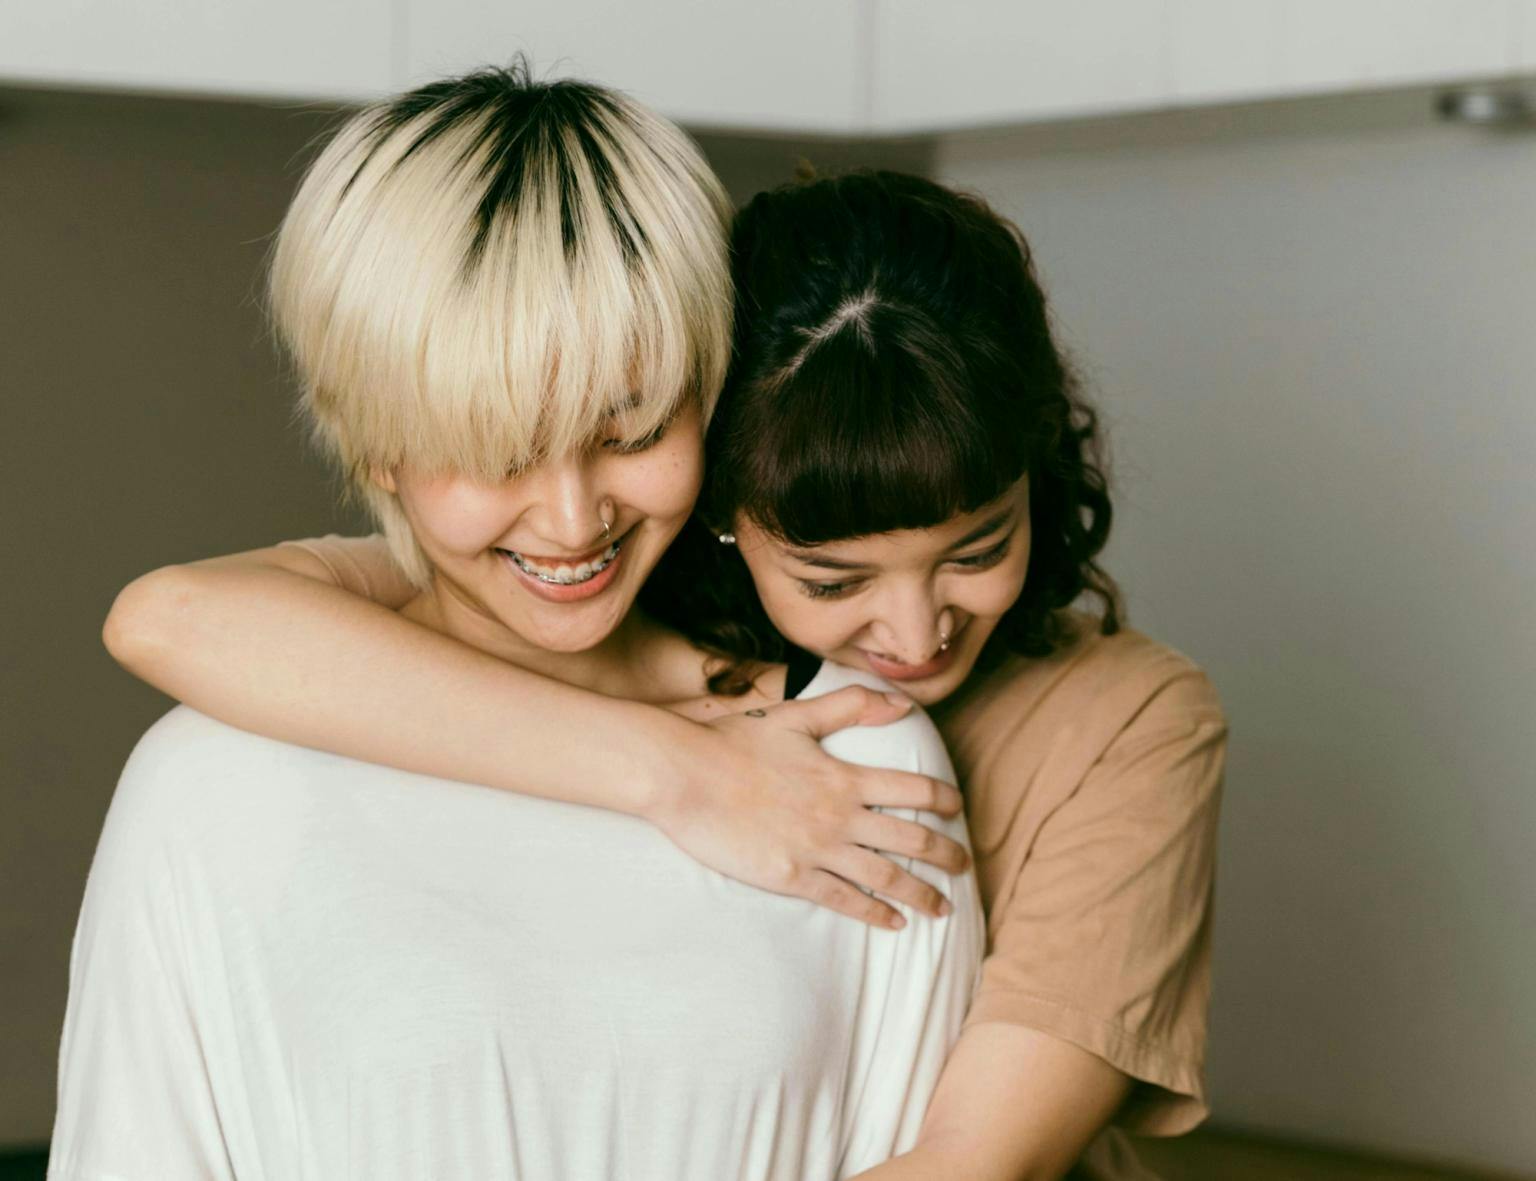 A woman hugs another woman from behind as they smile